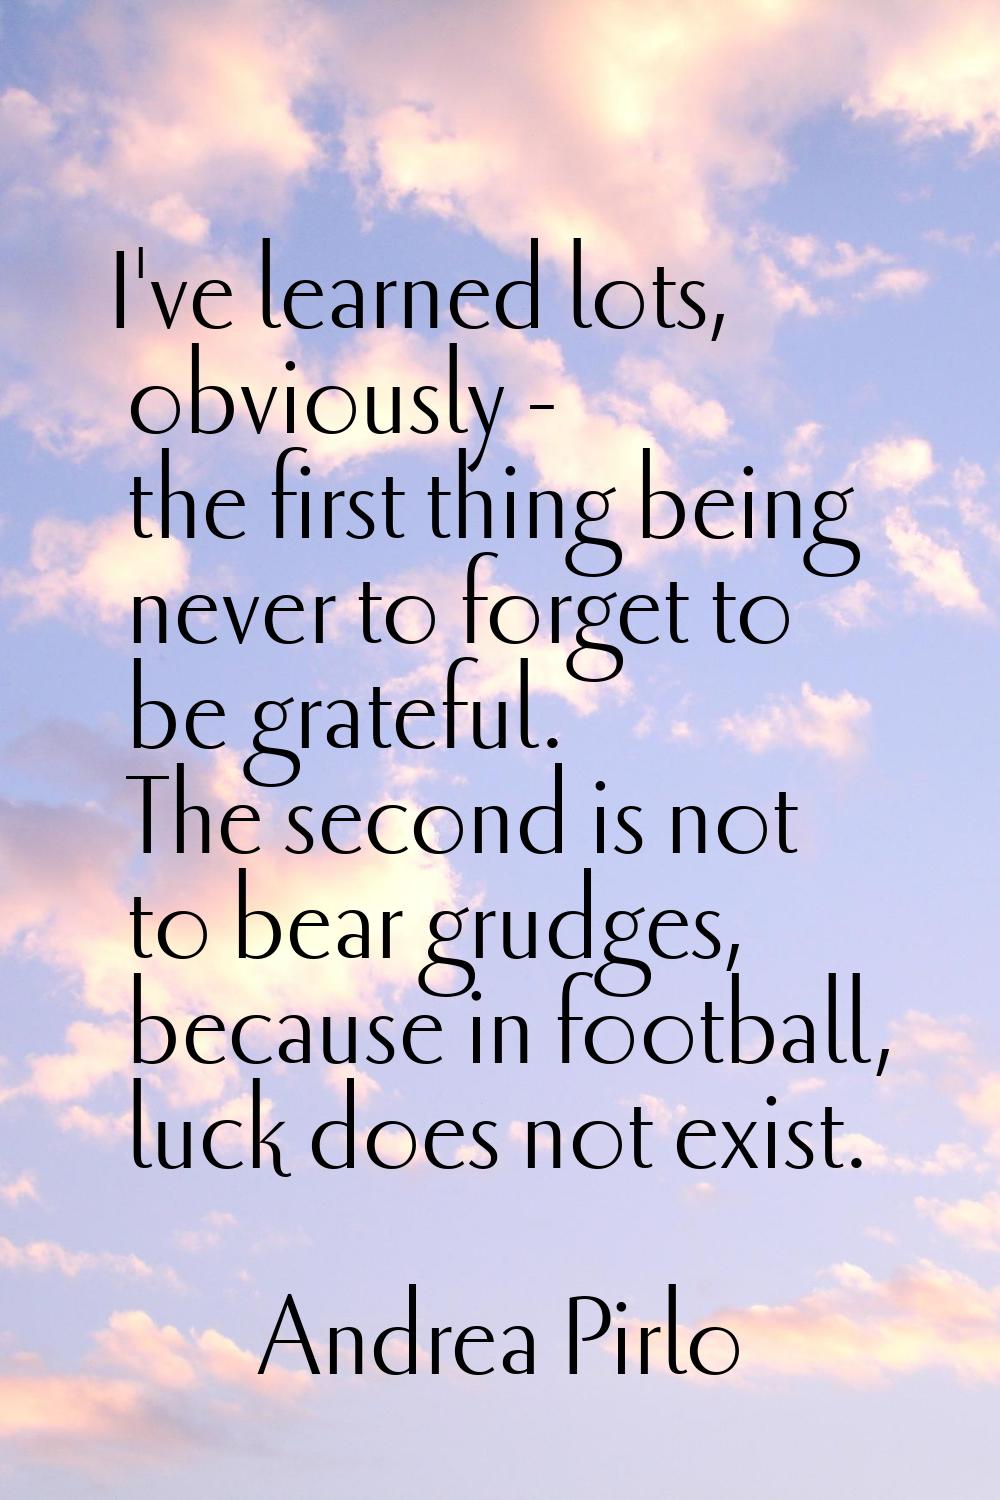 I've learned lots, obviously - the first thing being never to forget to be grateful. The second is 